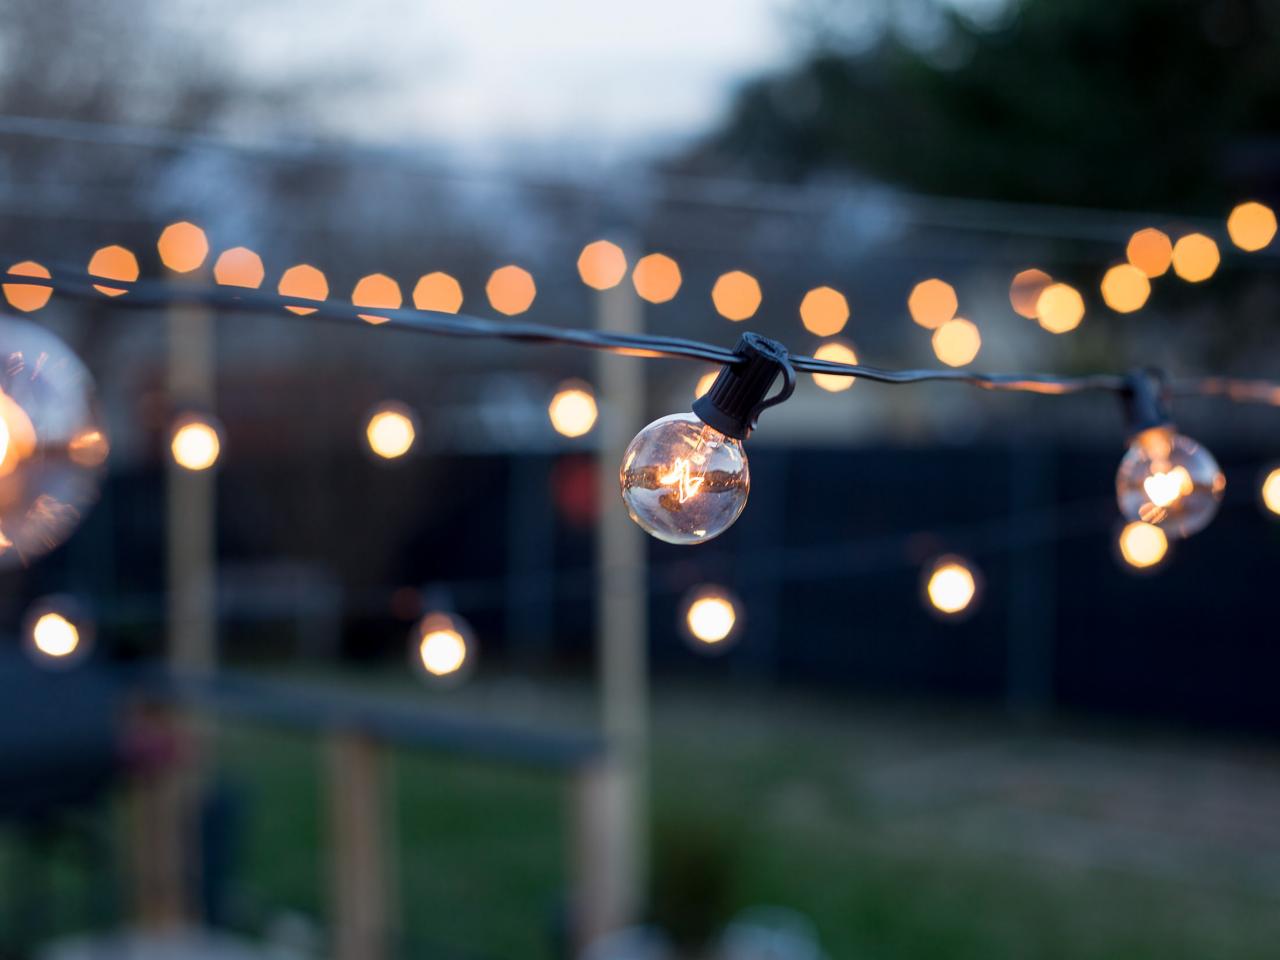 How To Hang Outdoor String Lights From, How To Hang Patio Lights On Brick Wall